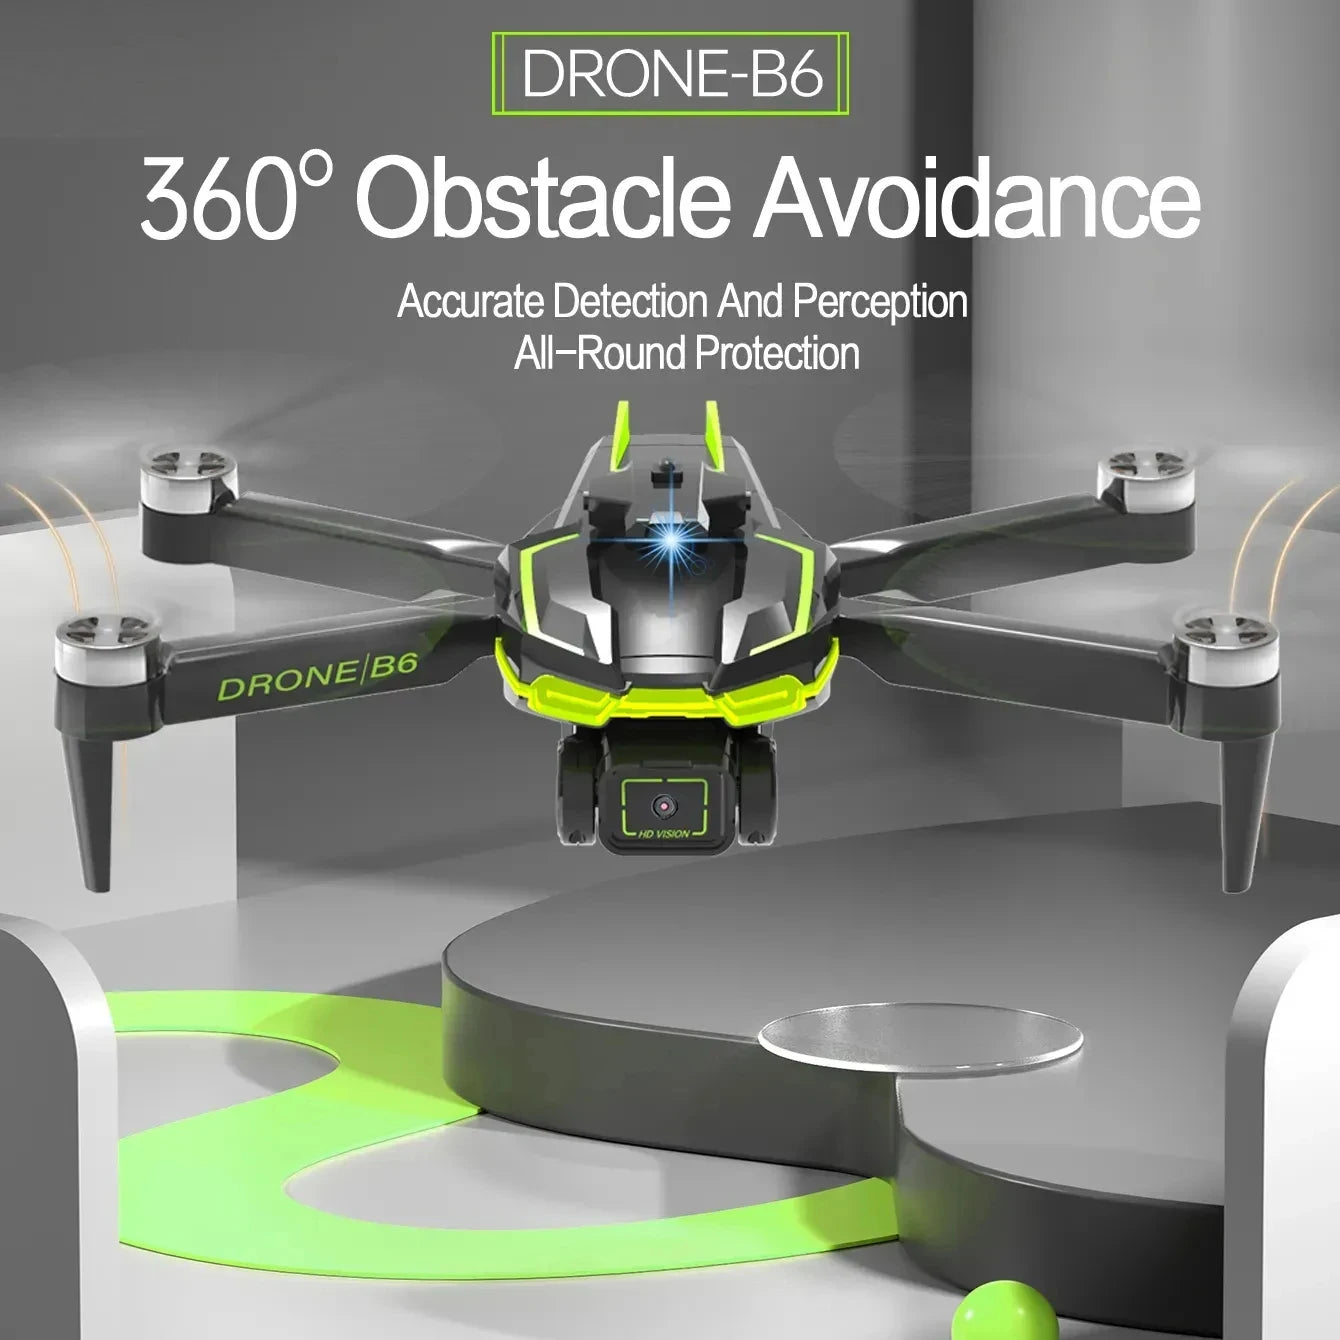 Lenovo B6 Race Drone Brushless Motor Dual 4K Professional Aerial Photography WIFI FPV Obstacle Avoidance Four-Axis Rc Quadcopter